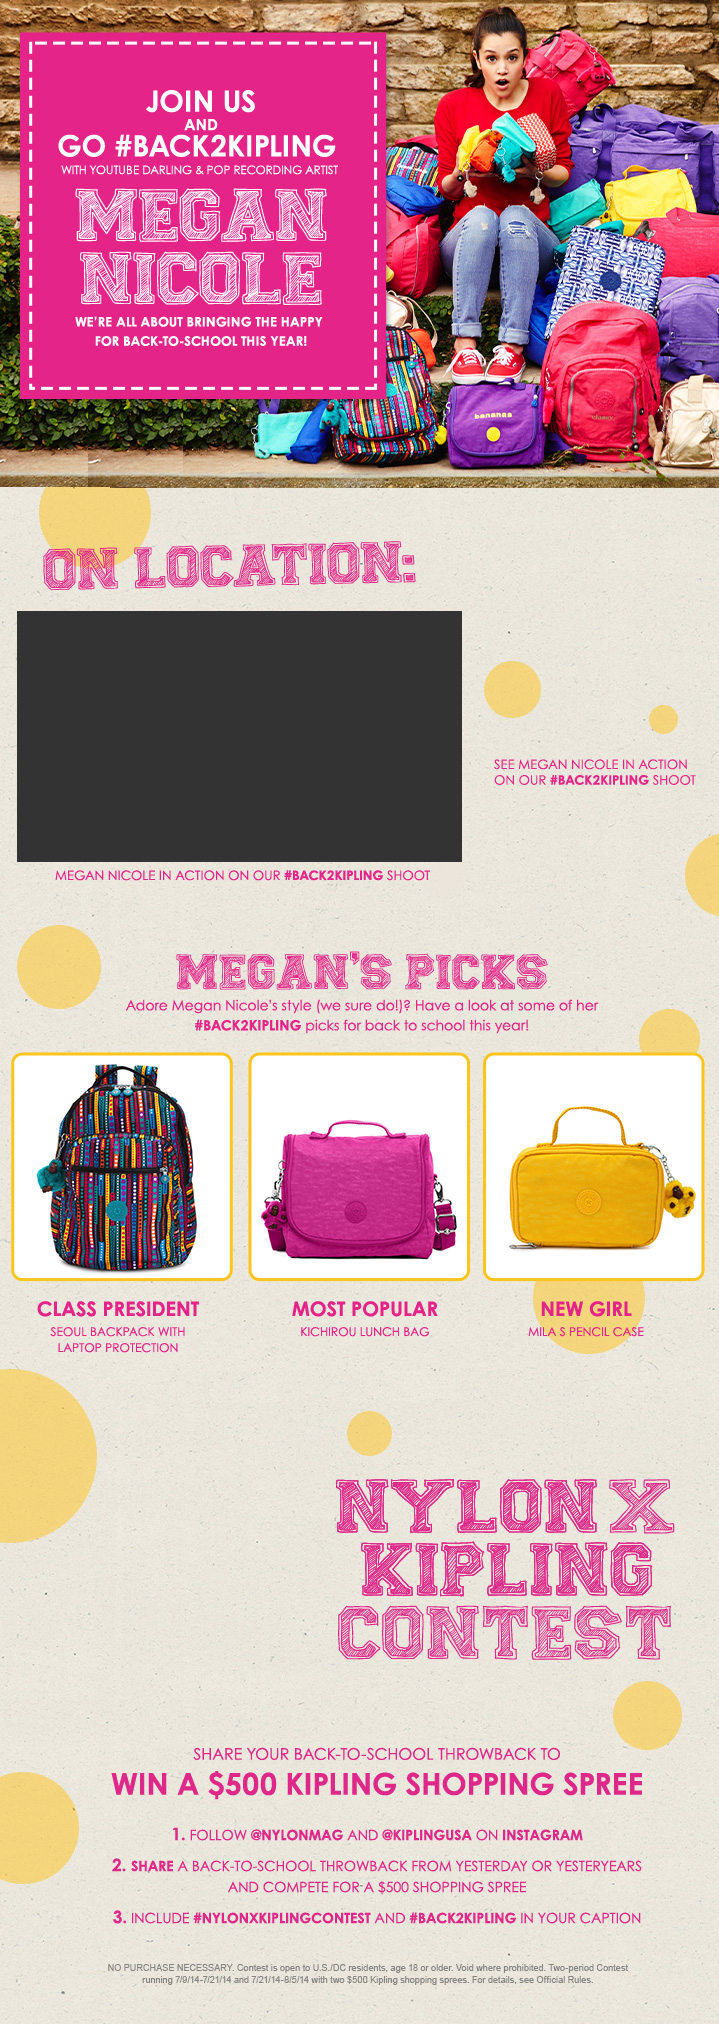 Back2Kipling Megan Nicole.  Share your back to school thowback to win a $500 Kipling Shopping Spree.  1. Follow @nylonmag and @kiplingusa on instagram.  2. Share a back to school throwback from yesterday or yesteryears and compete for a $500 shopping spree.  3. Include #nylonxkiplingcontest and #back2kipling in your caption.